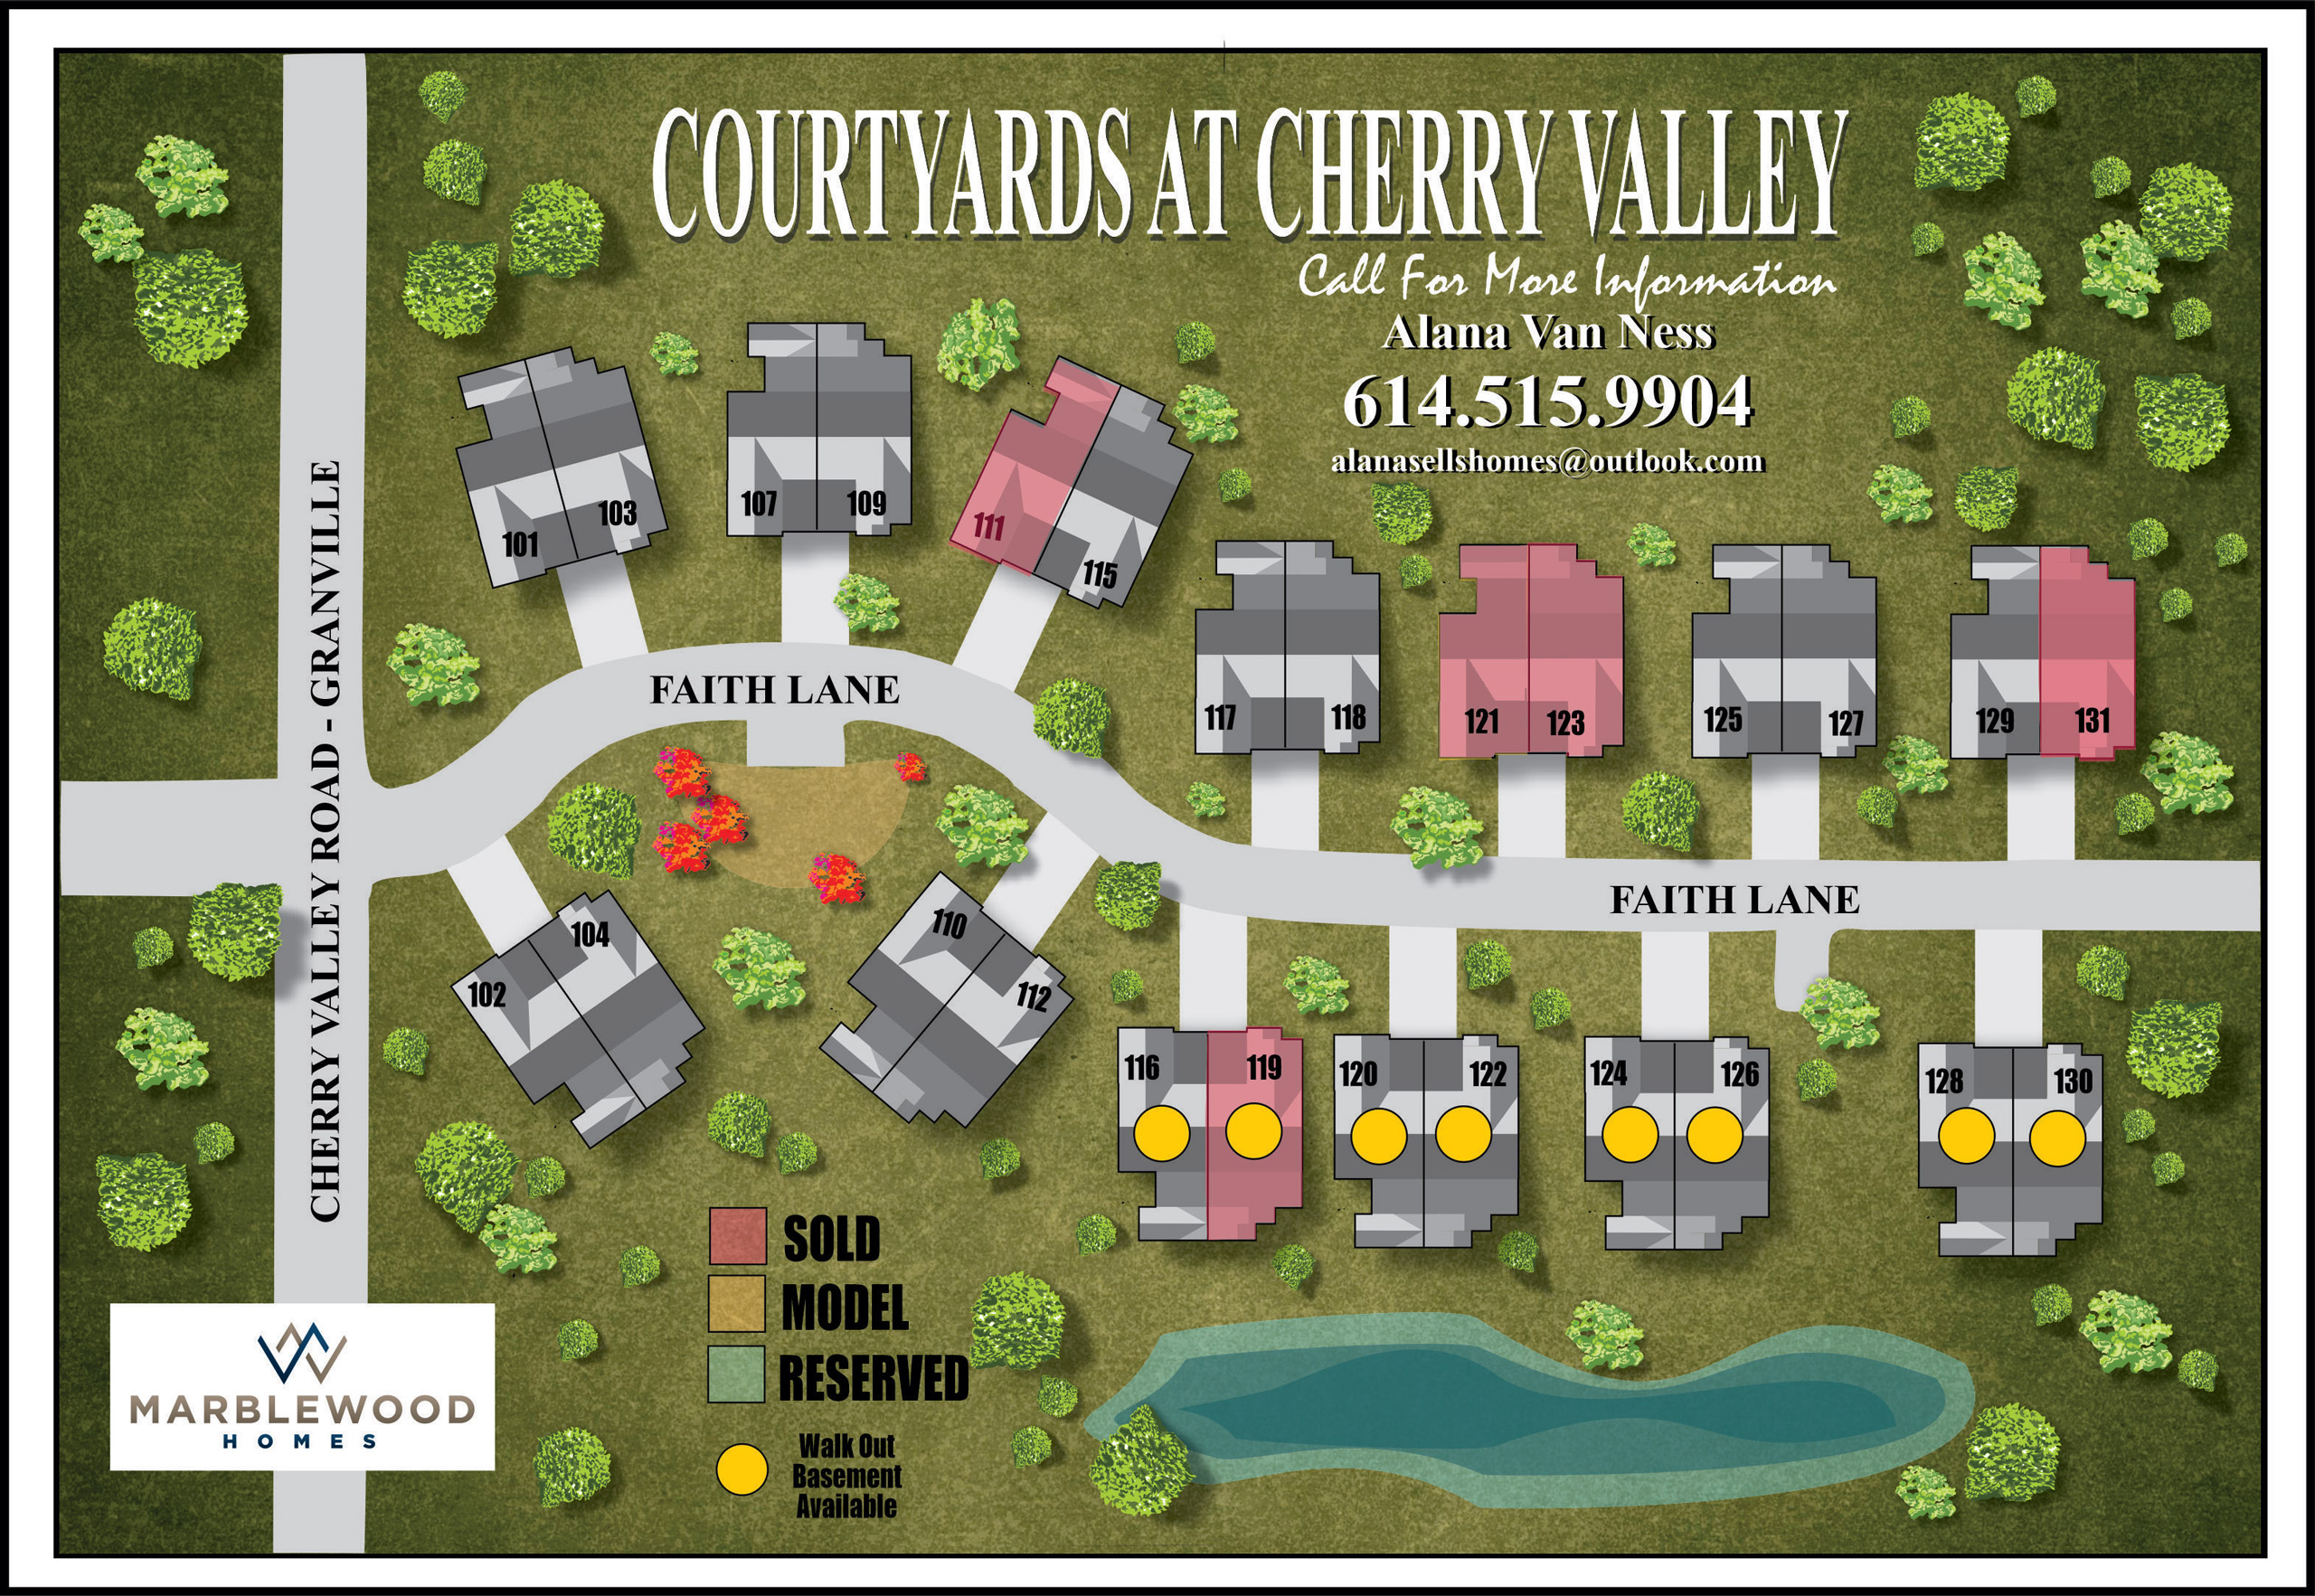 Courtyards at Cherry Valley